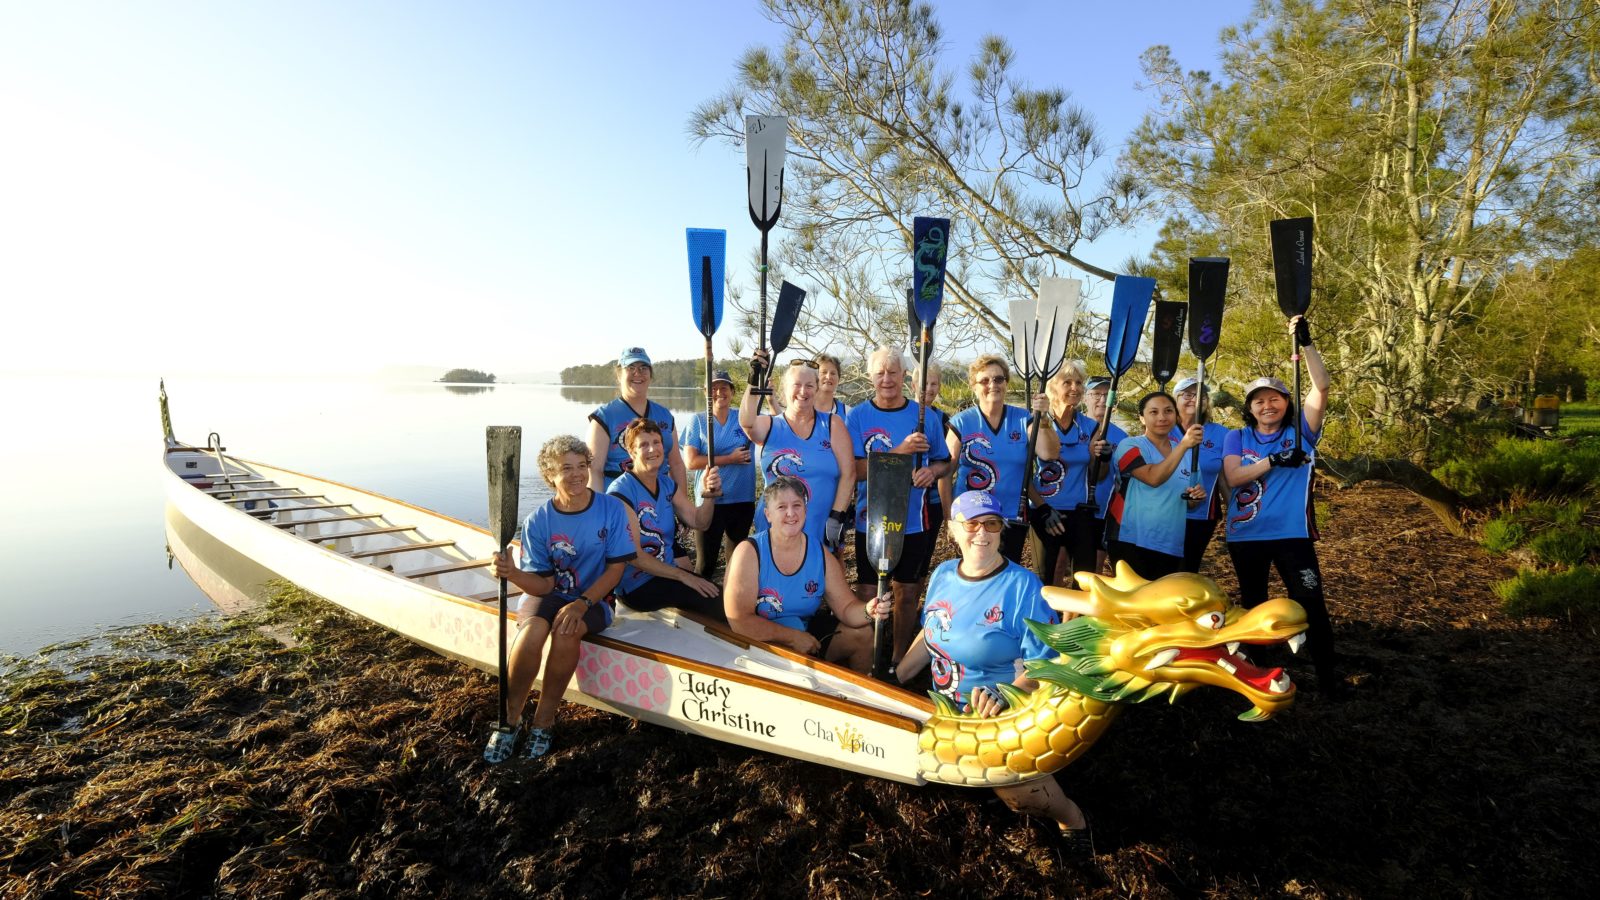 Wallis Spirit Dragon Boat Club offers Learn To Paddle Programs at Coomba Park.